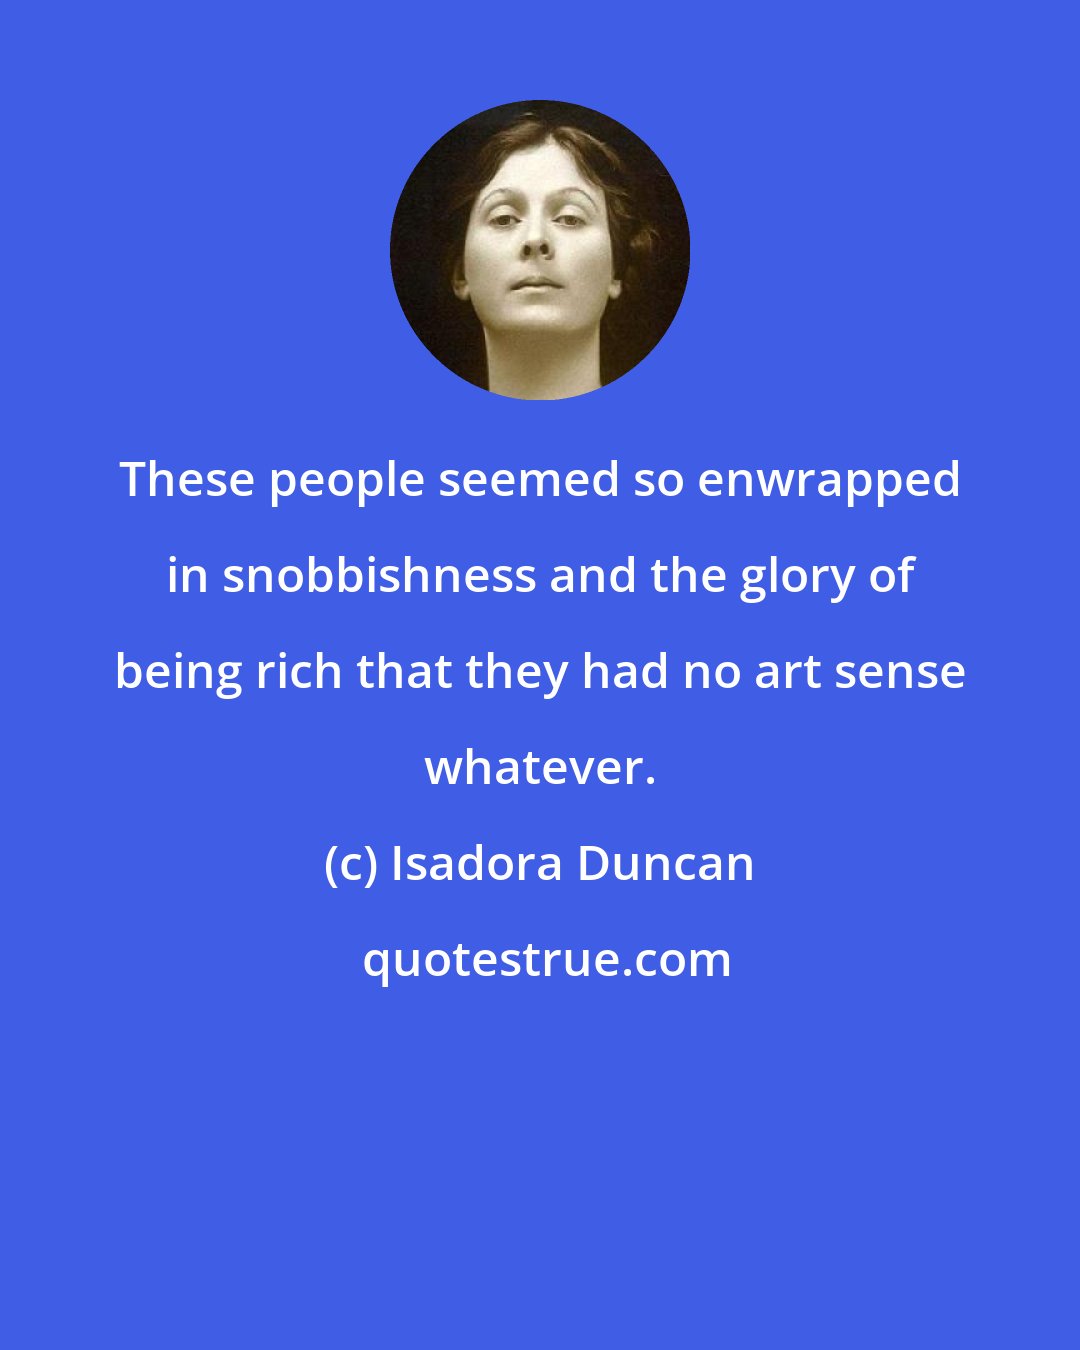 Isadora Duncan: These people seemed so enwrapped in snobbishness and the glory of being rich that they had no art sense whatever.